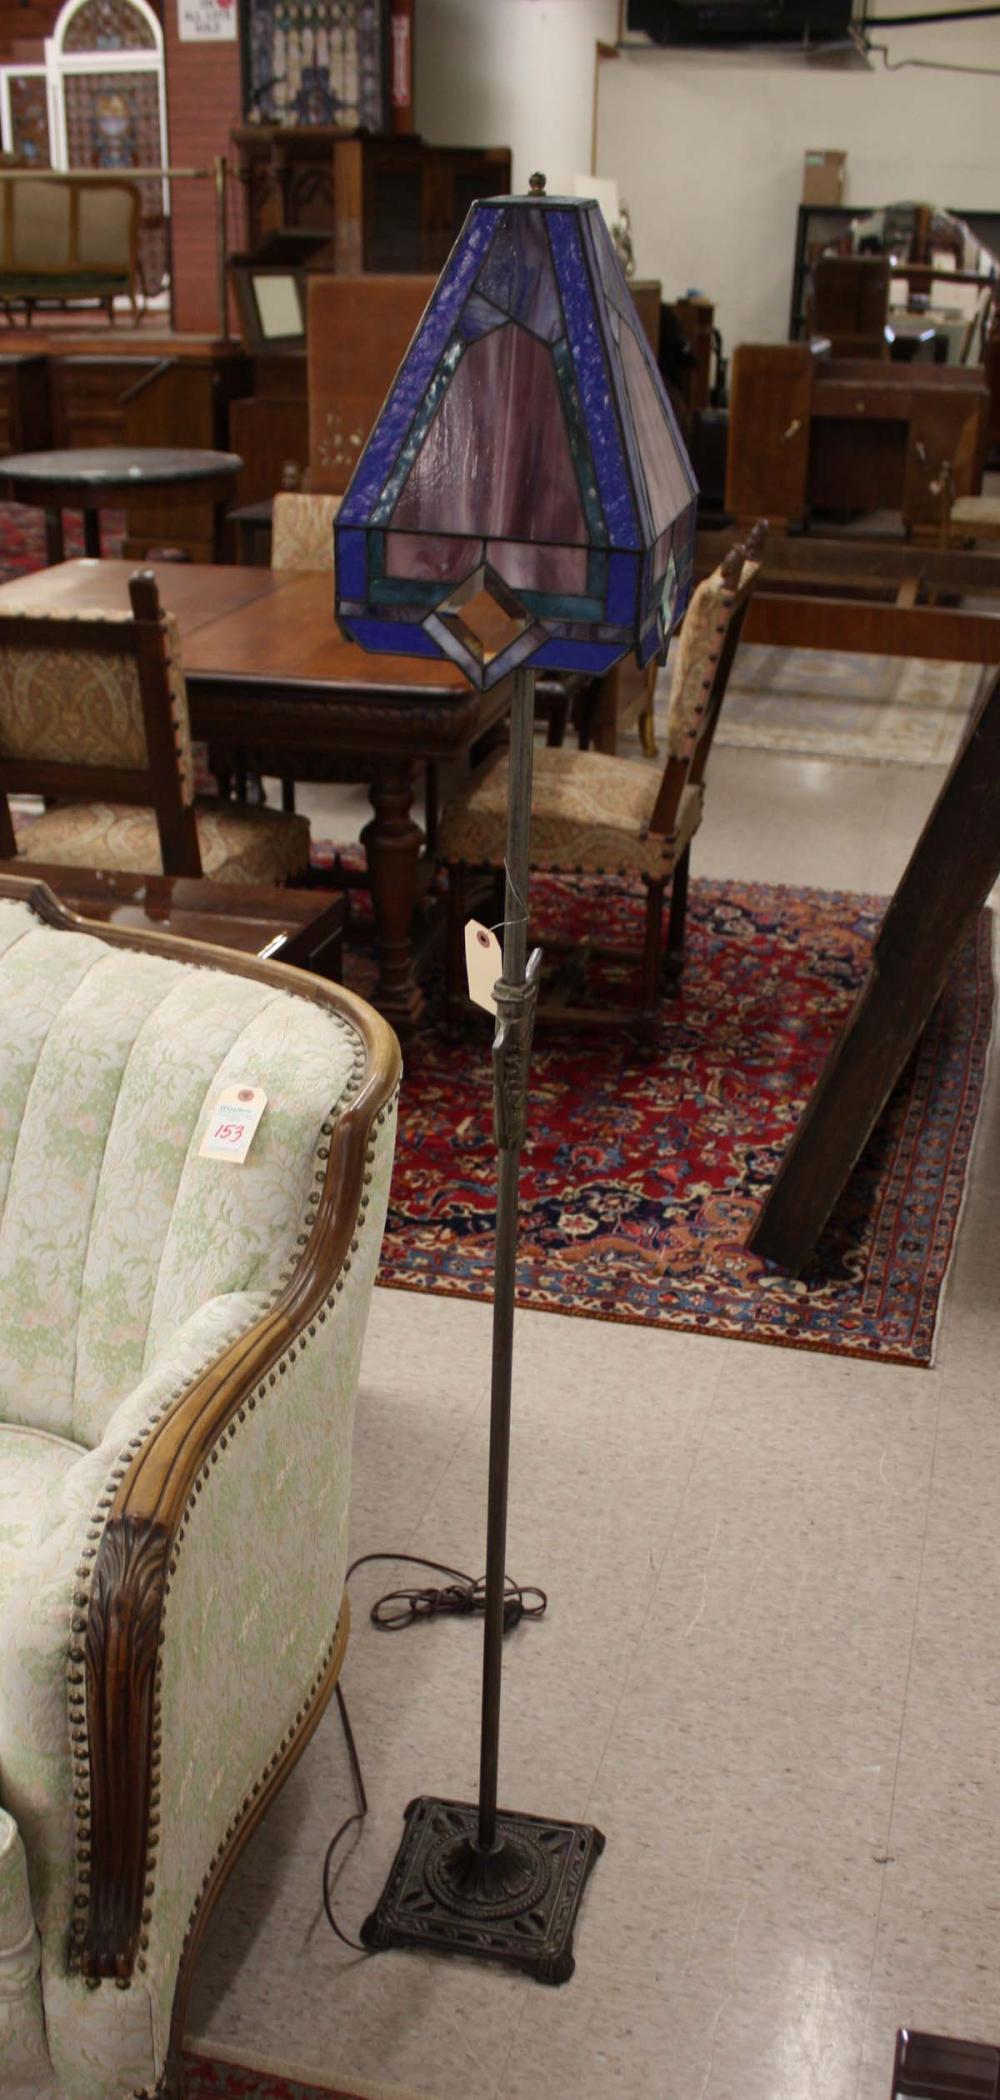 VINTAGE FLOOR LAMP WITH STAINED 33e998